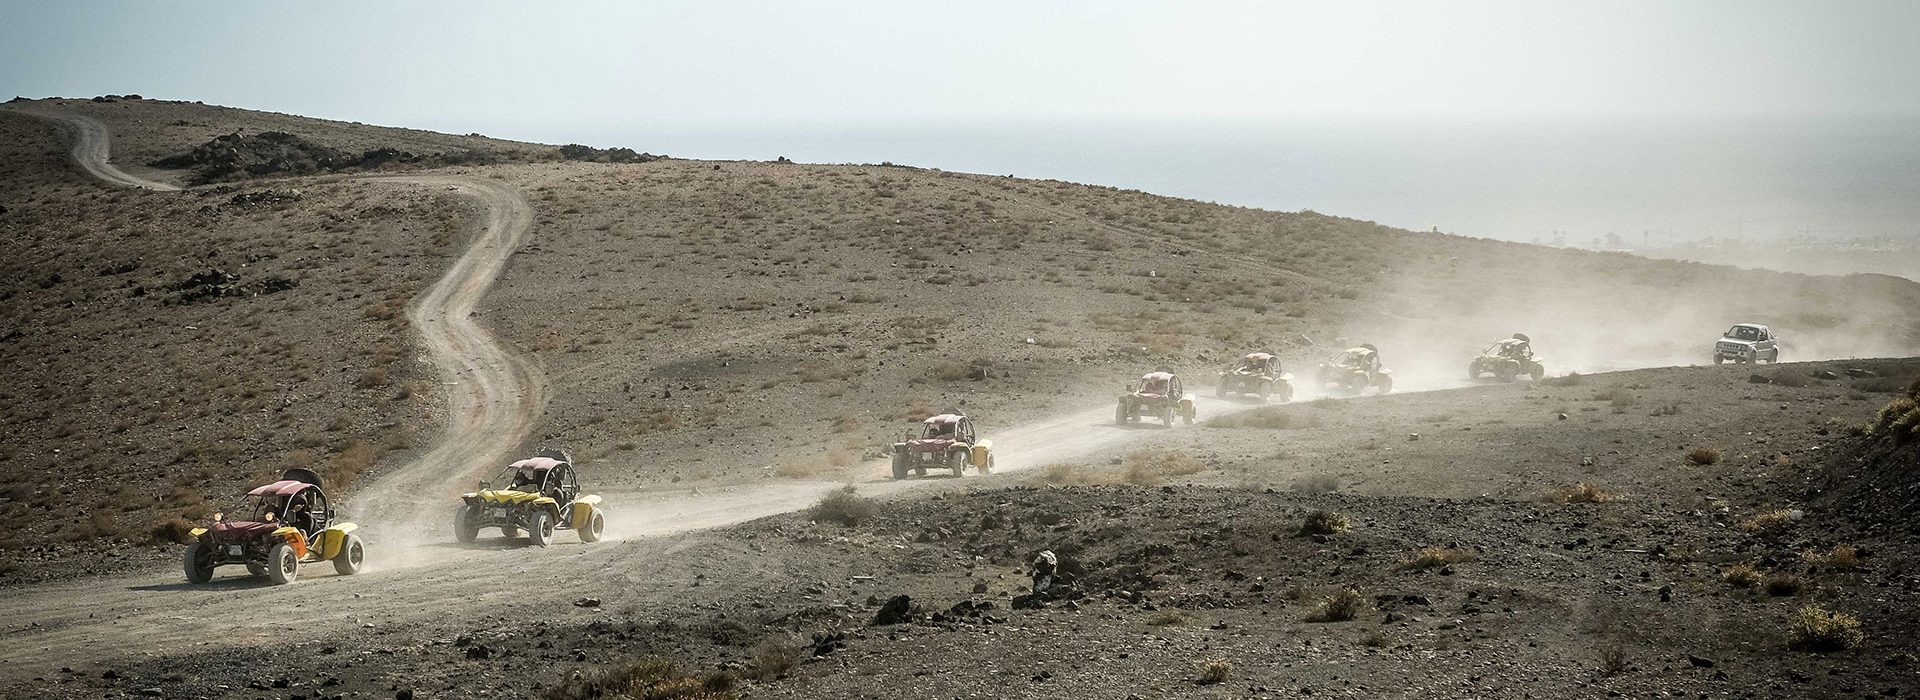 Beach buggy safari on the volcanic terrain of the Canary Islands in Lanzarote.